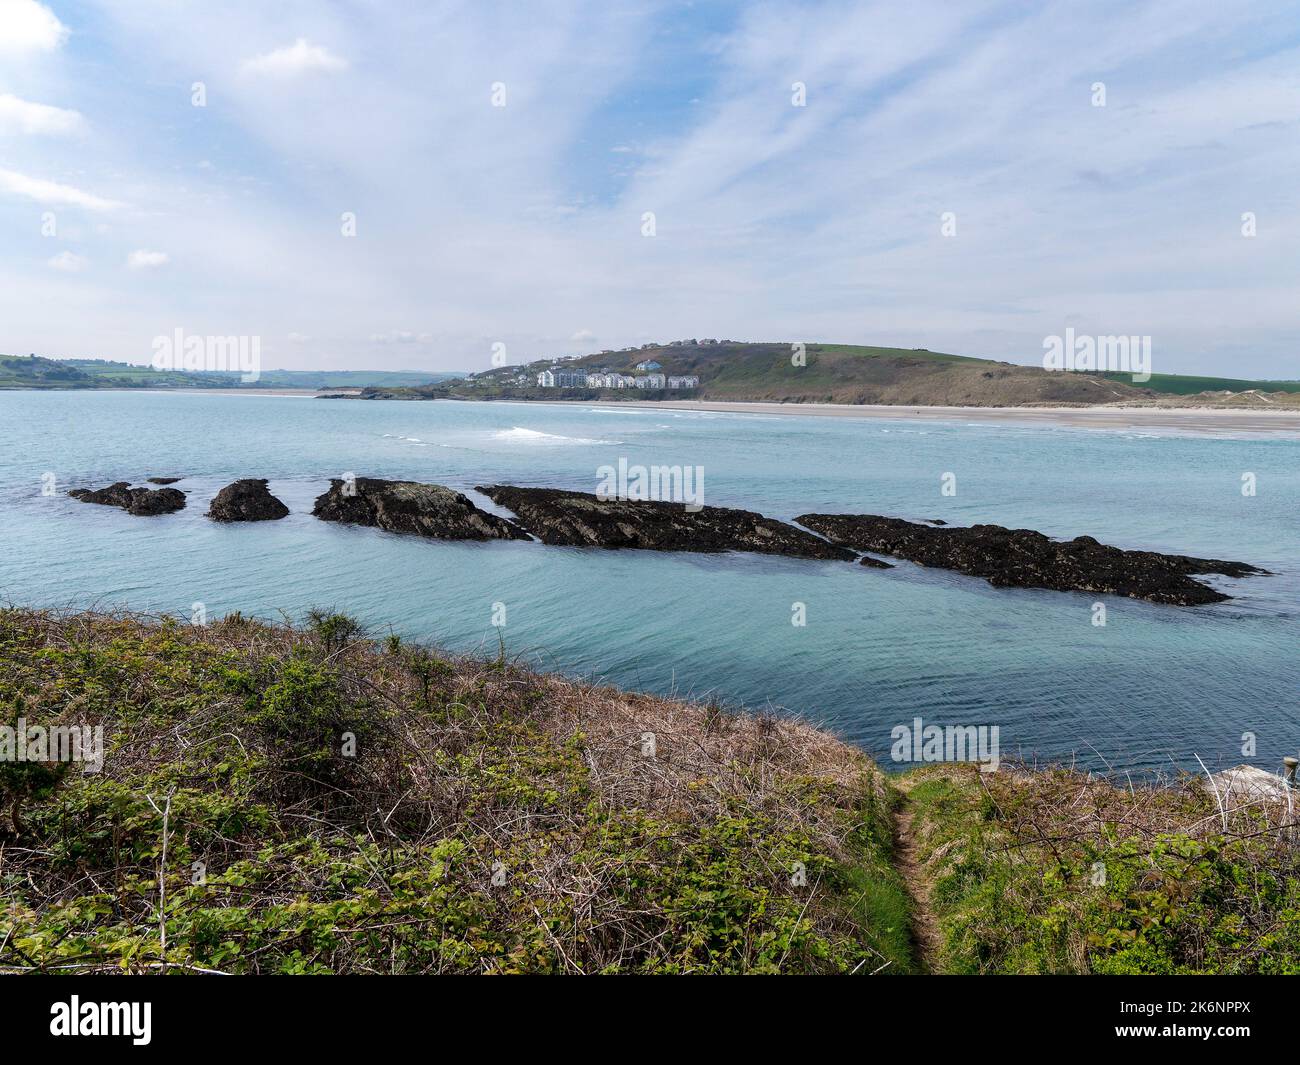 Dense coastal bushes. View of Clonakilty Bay. Sea rocks. A picturesque place in northern Europe, rock formation near body of water. The nature of Irel Stock Photo